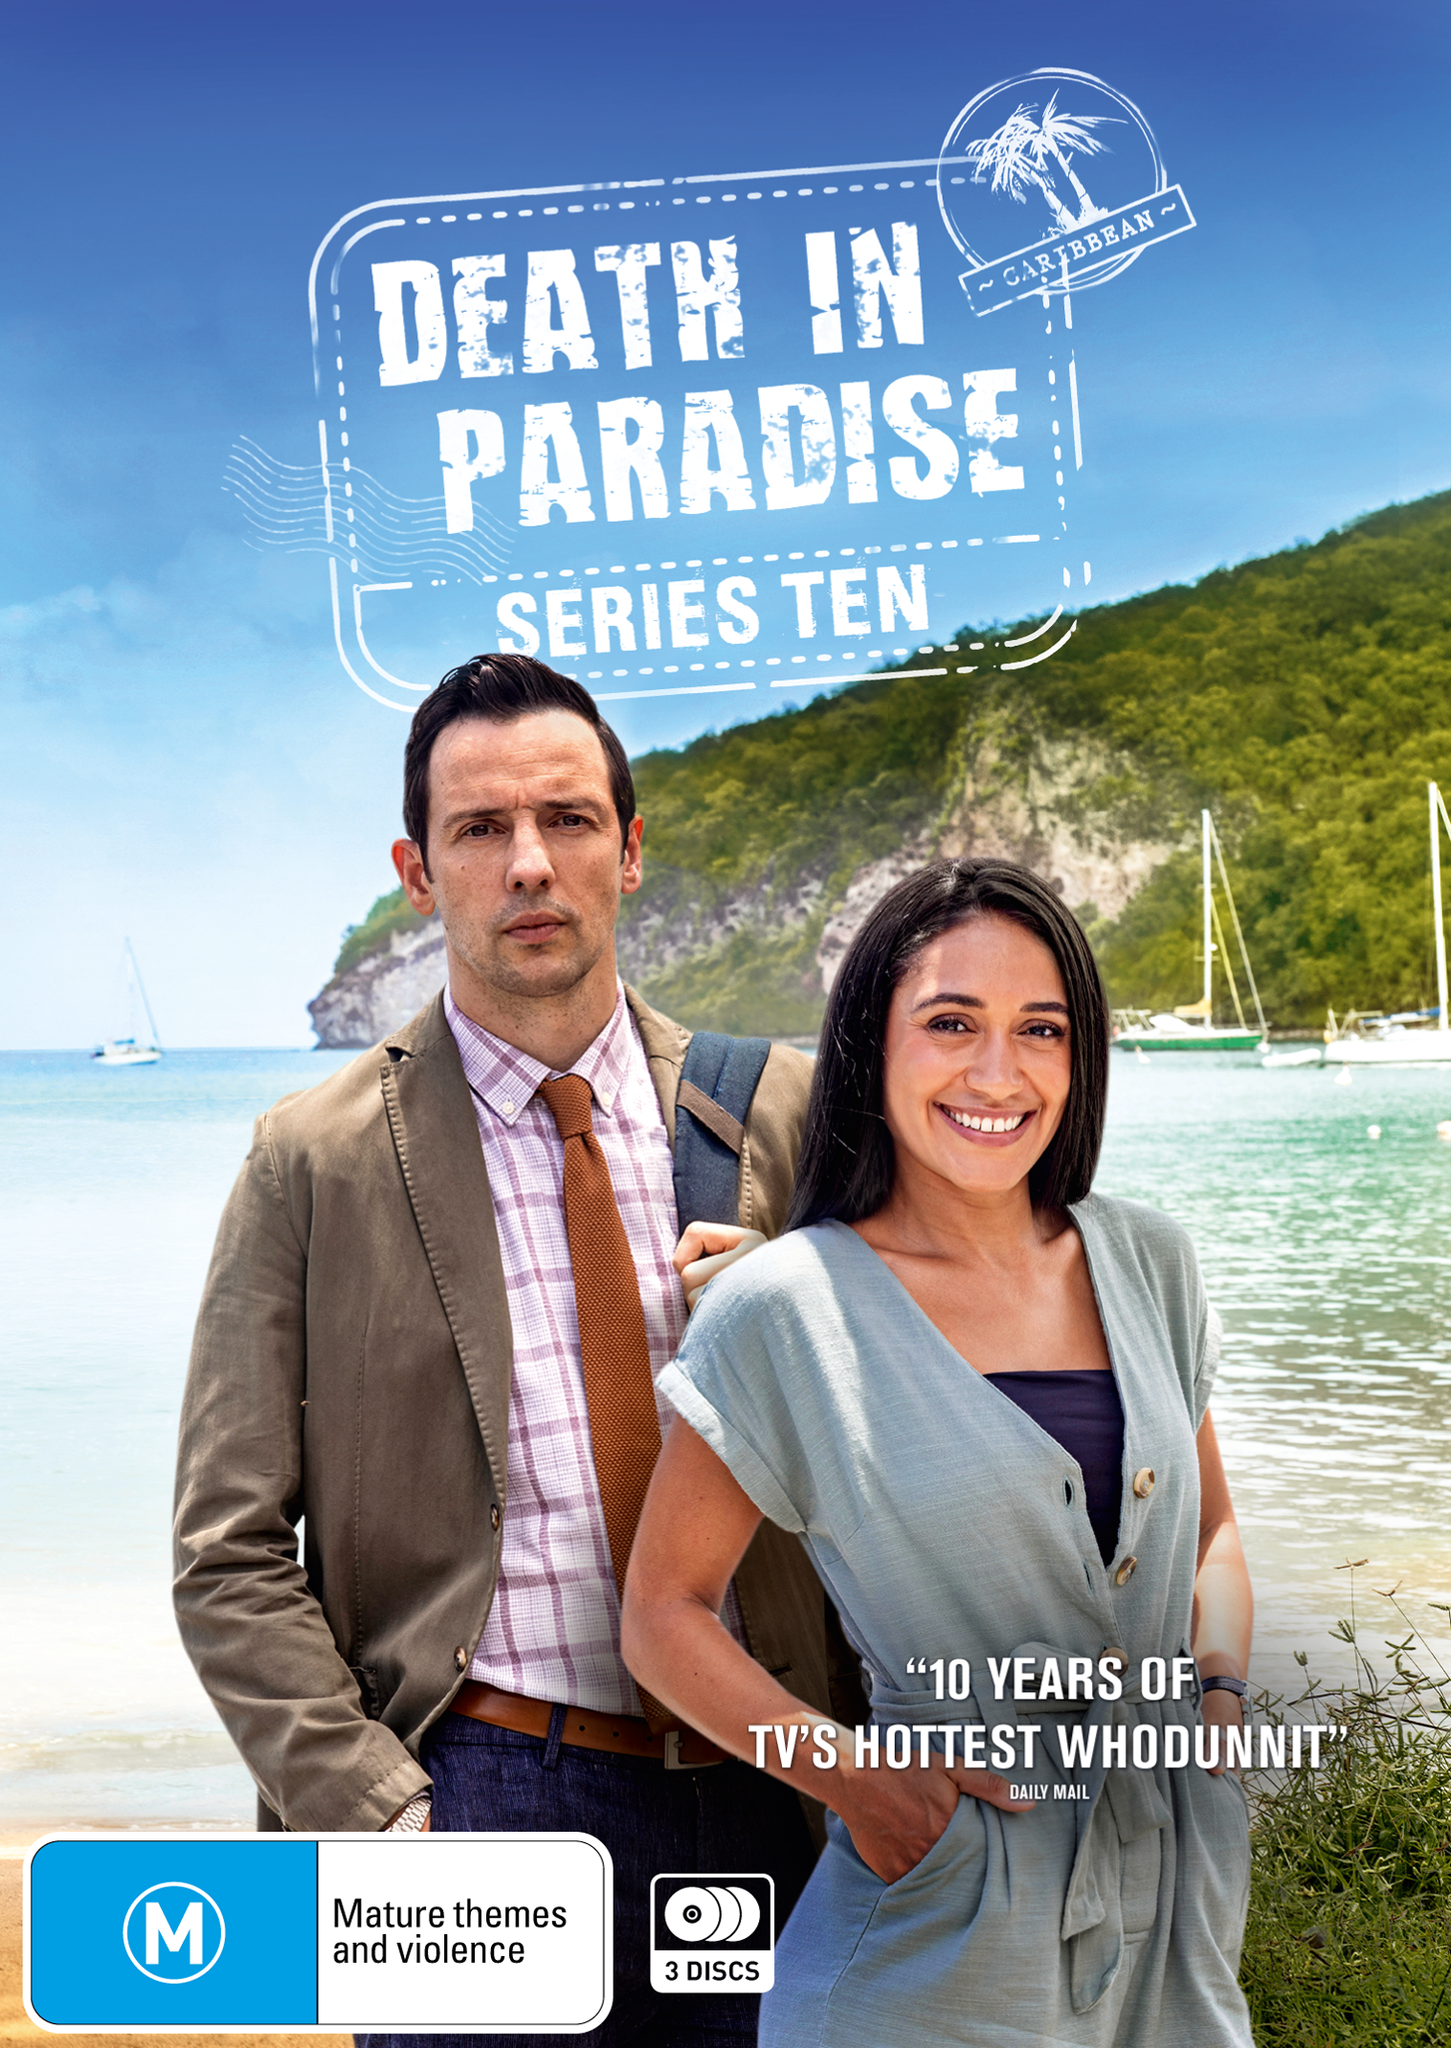 DEATH IN PARADISE: SERIES 10